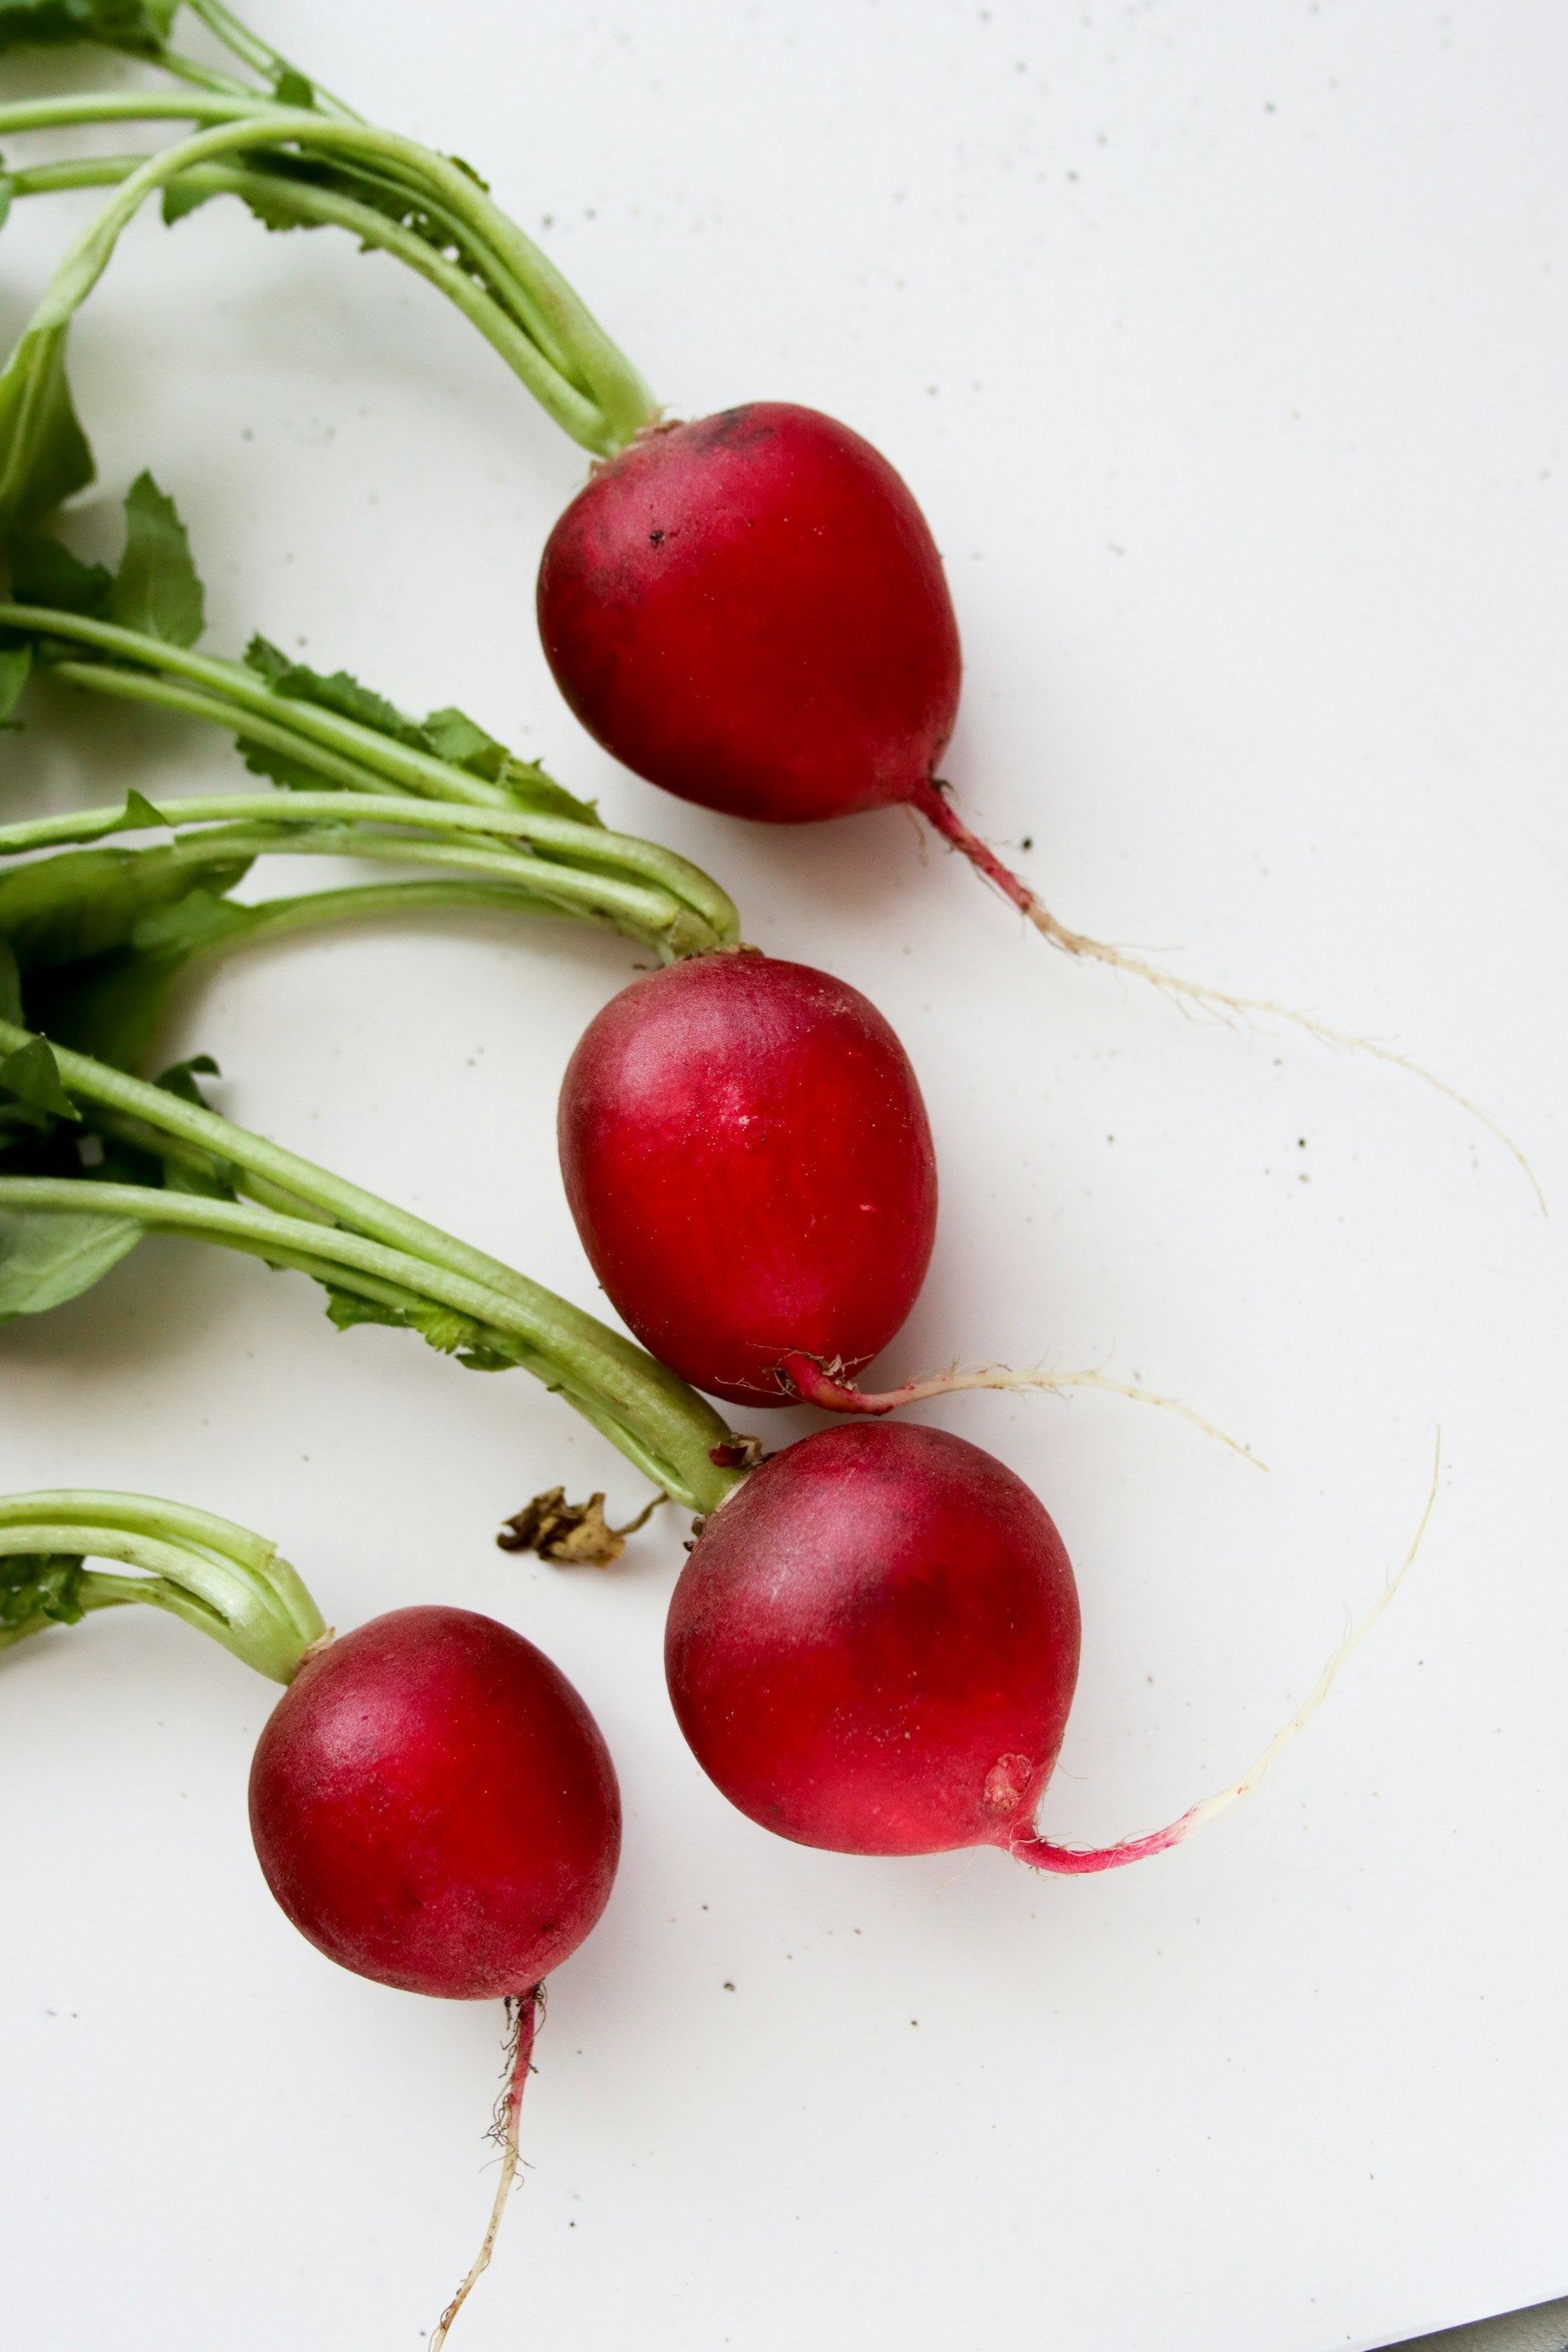 On display are 4 radishes, of the variety Crimson Giant. The radishes appear to be freshly harvested, with dirt still pronounced in various spots. Still attached are their stalks. The radishes appear on a white surface. 